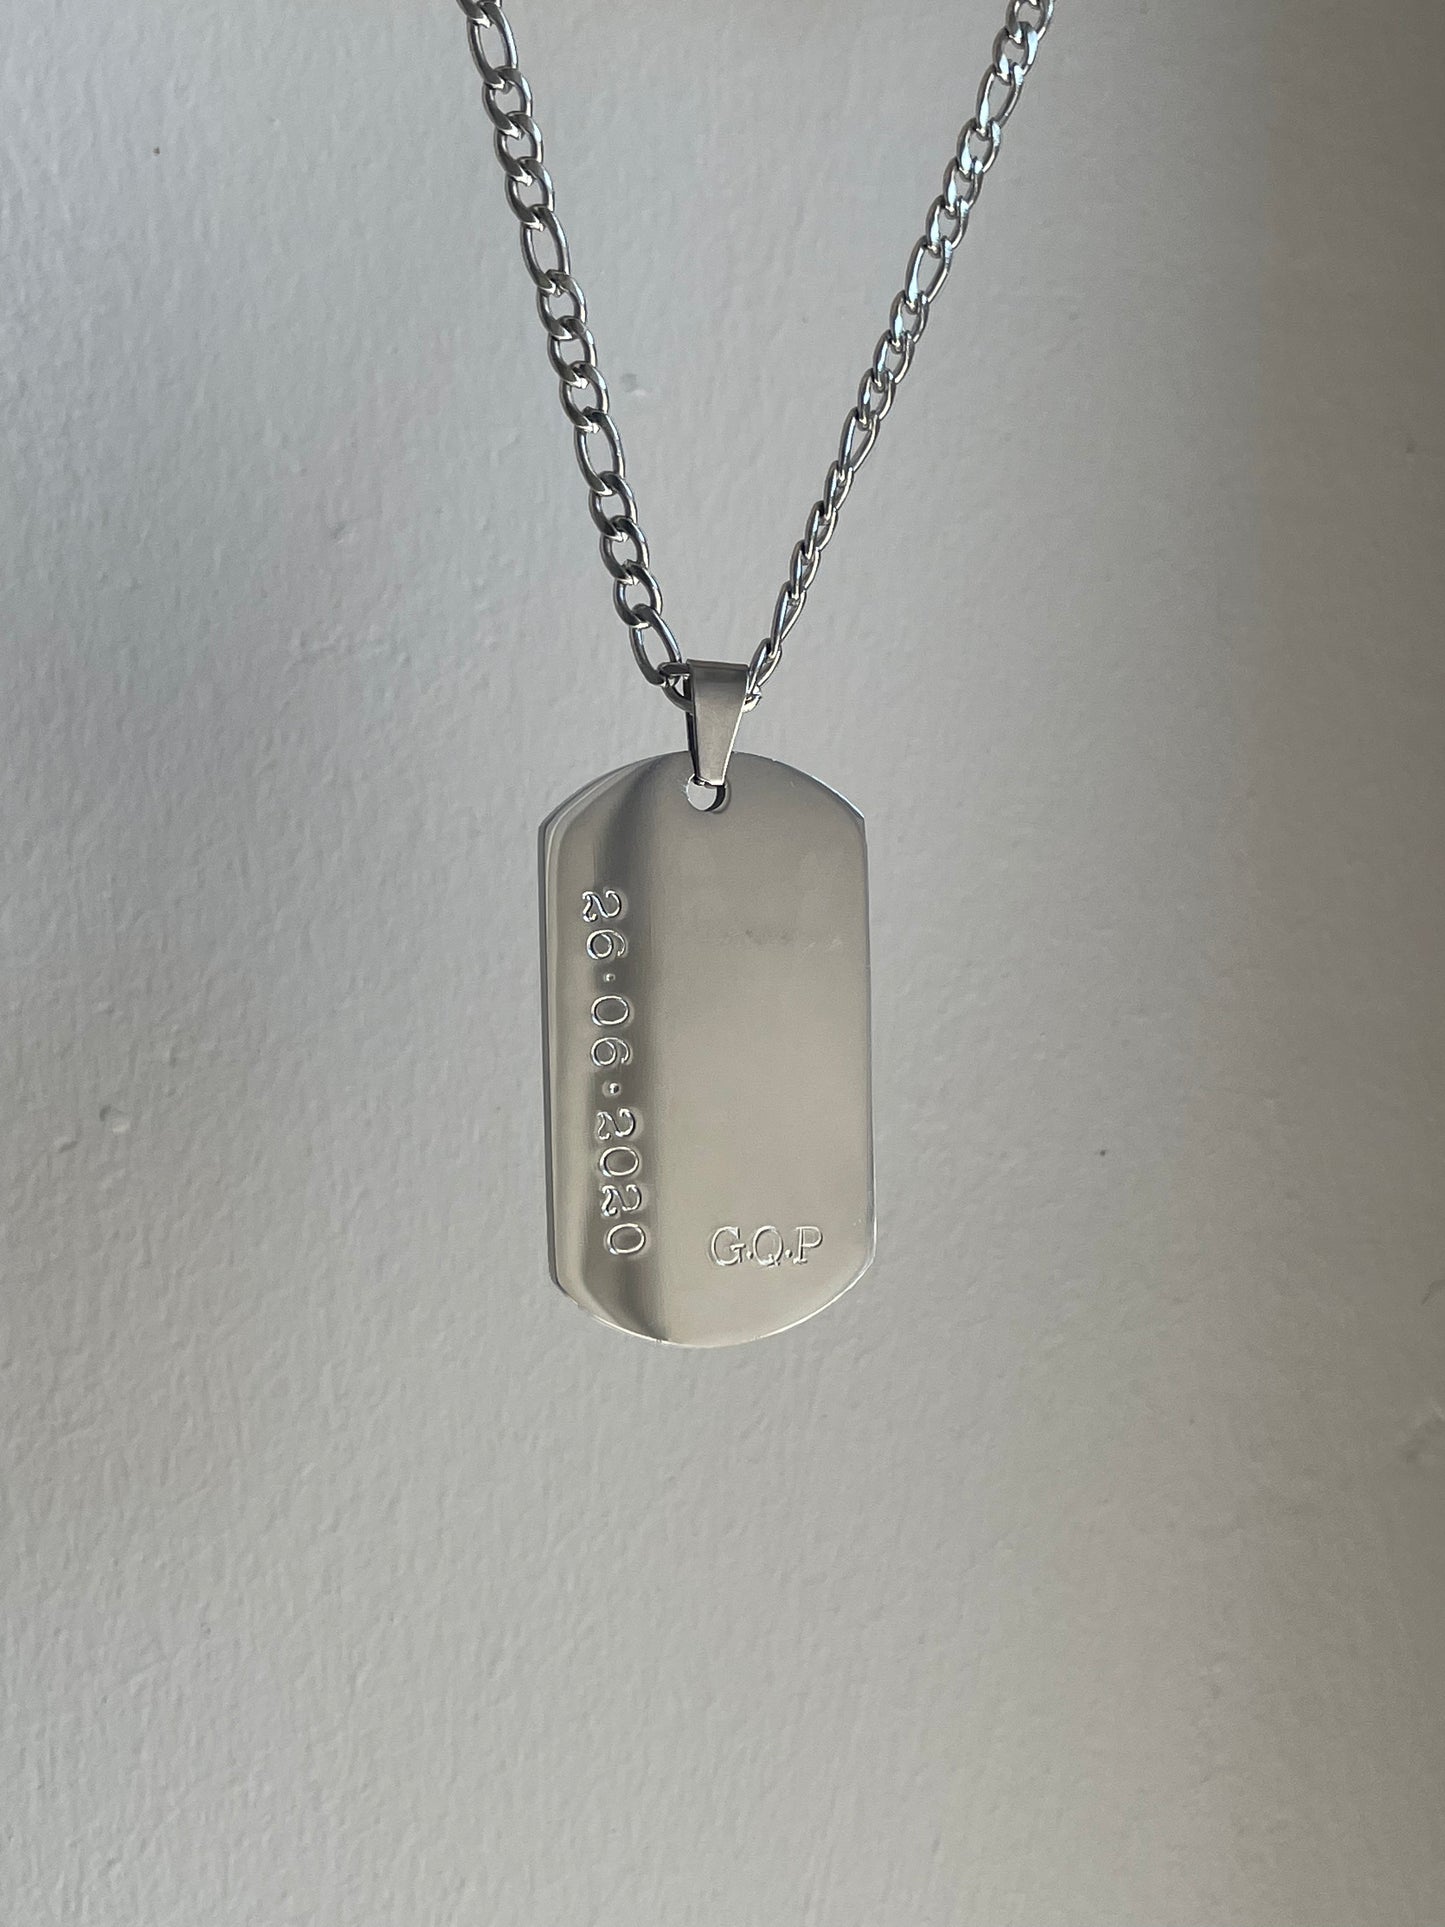 Military tag necklace – Shellbrands